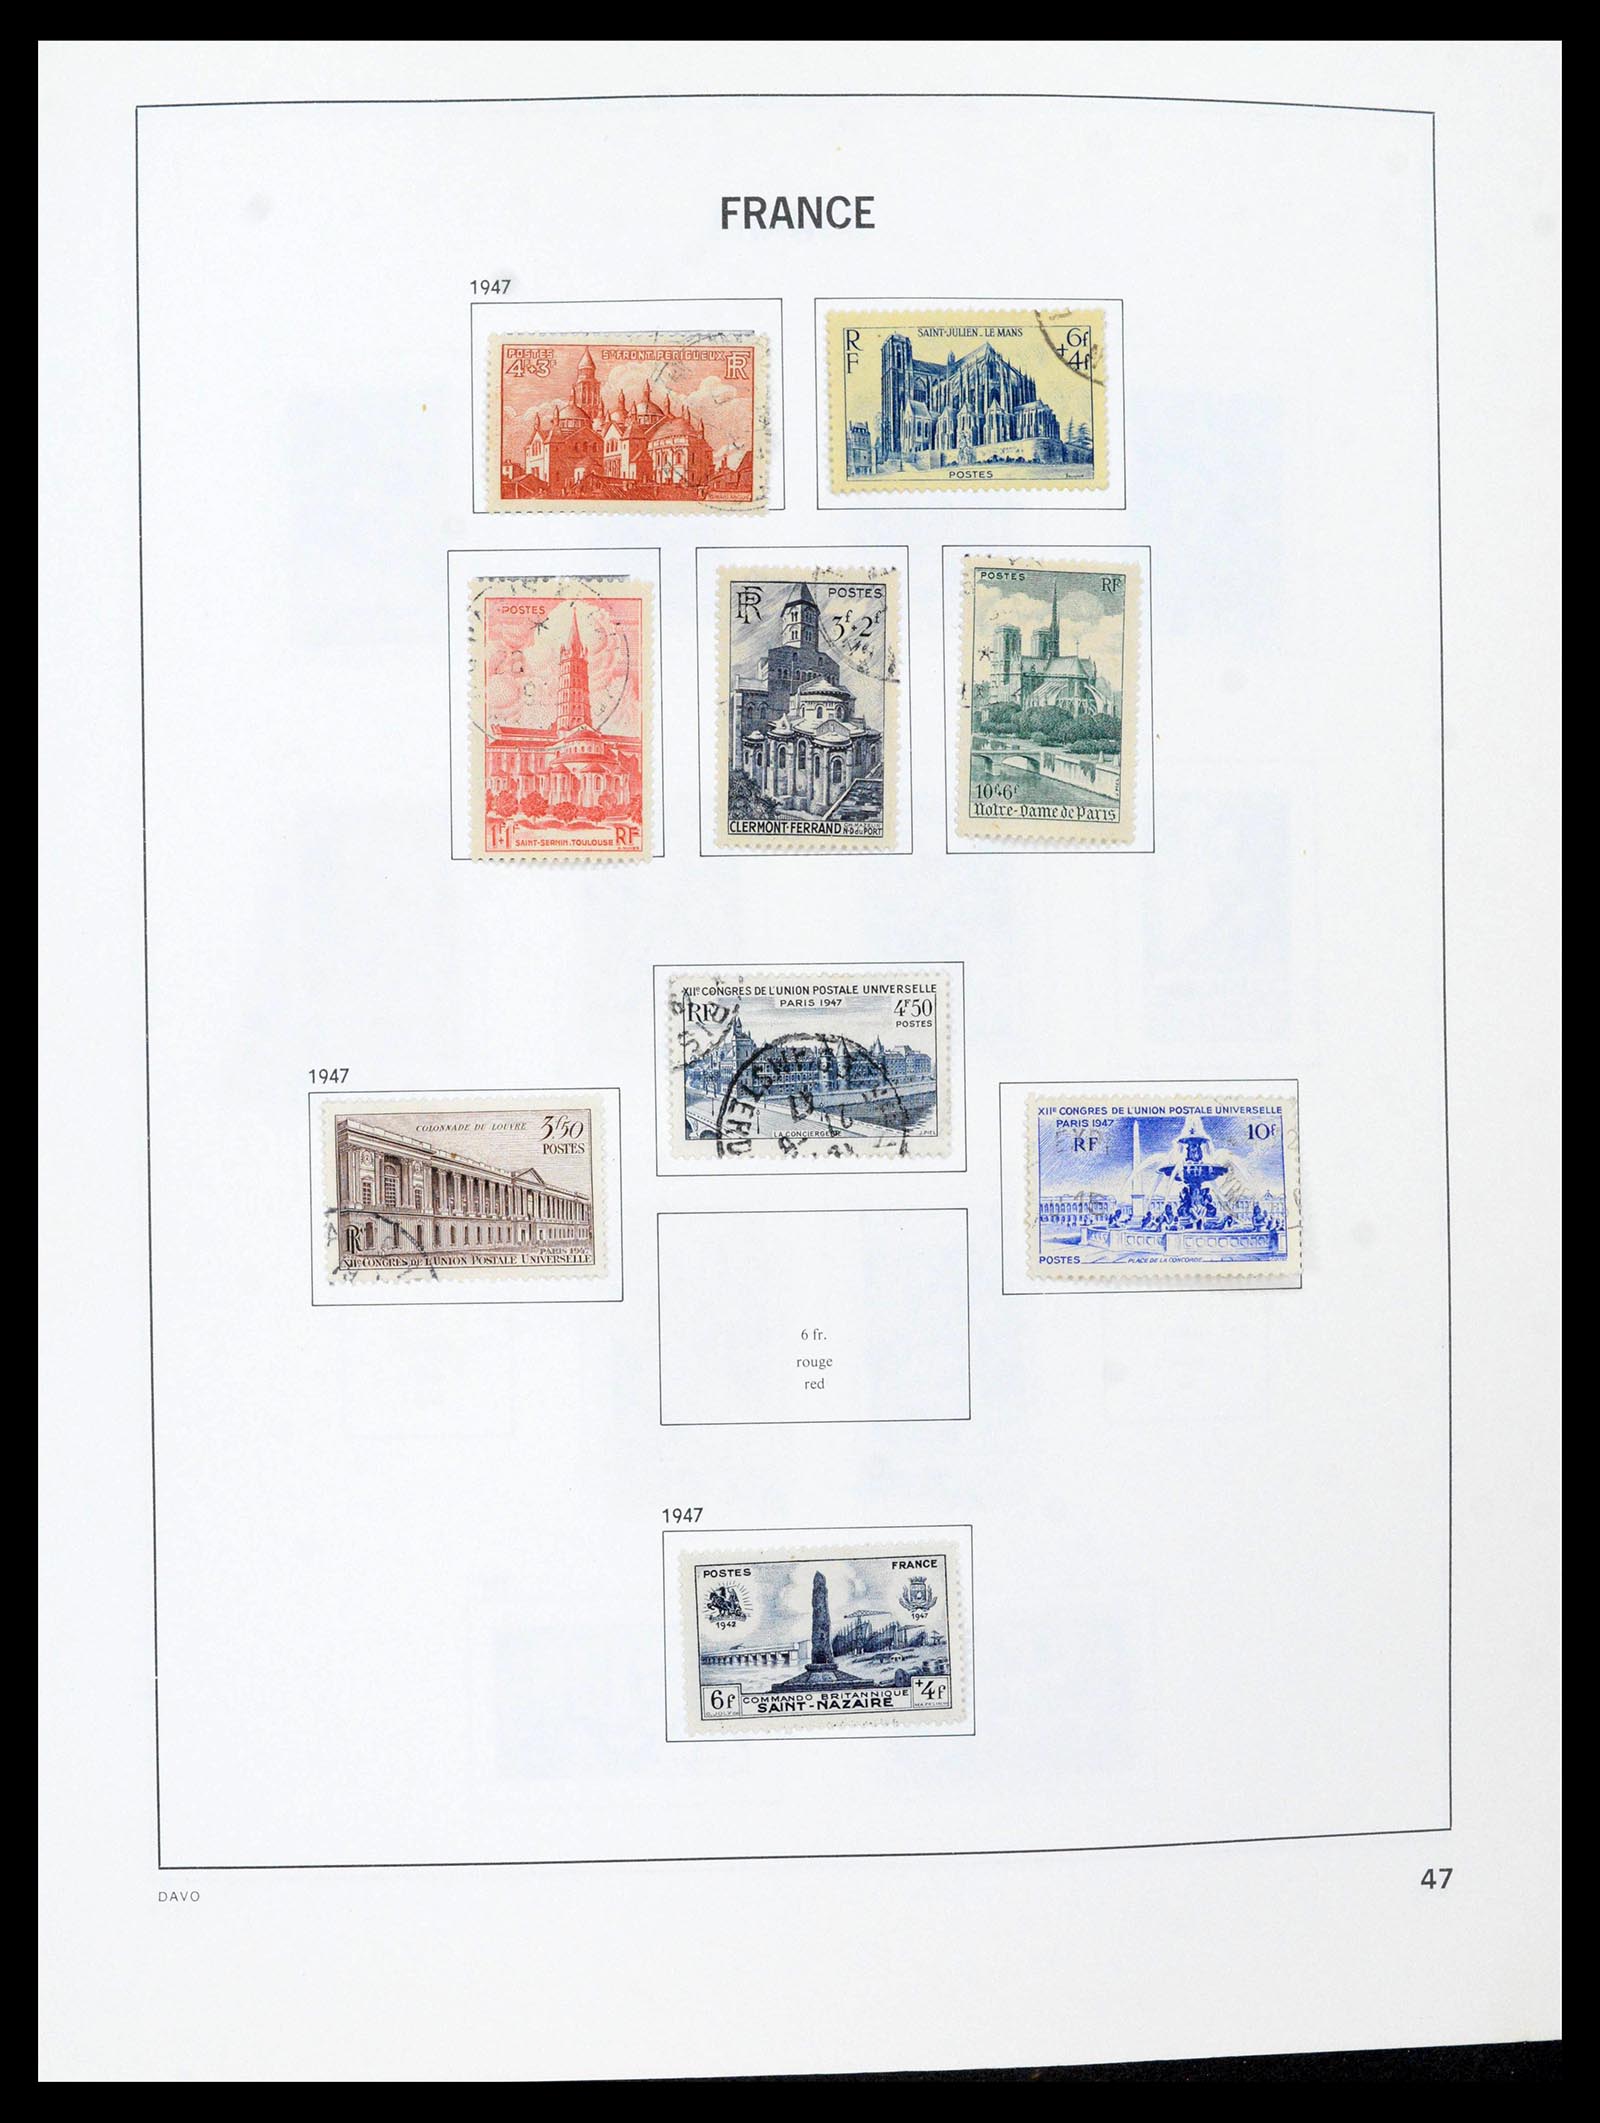 39164 0047 - Stamp collection 39164 France 1849-1981.